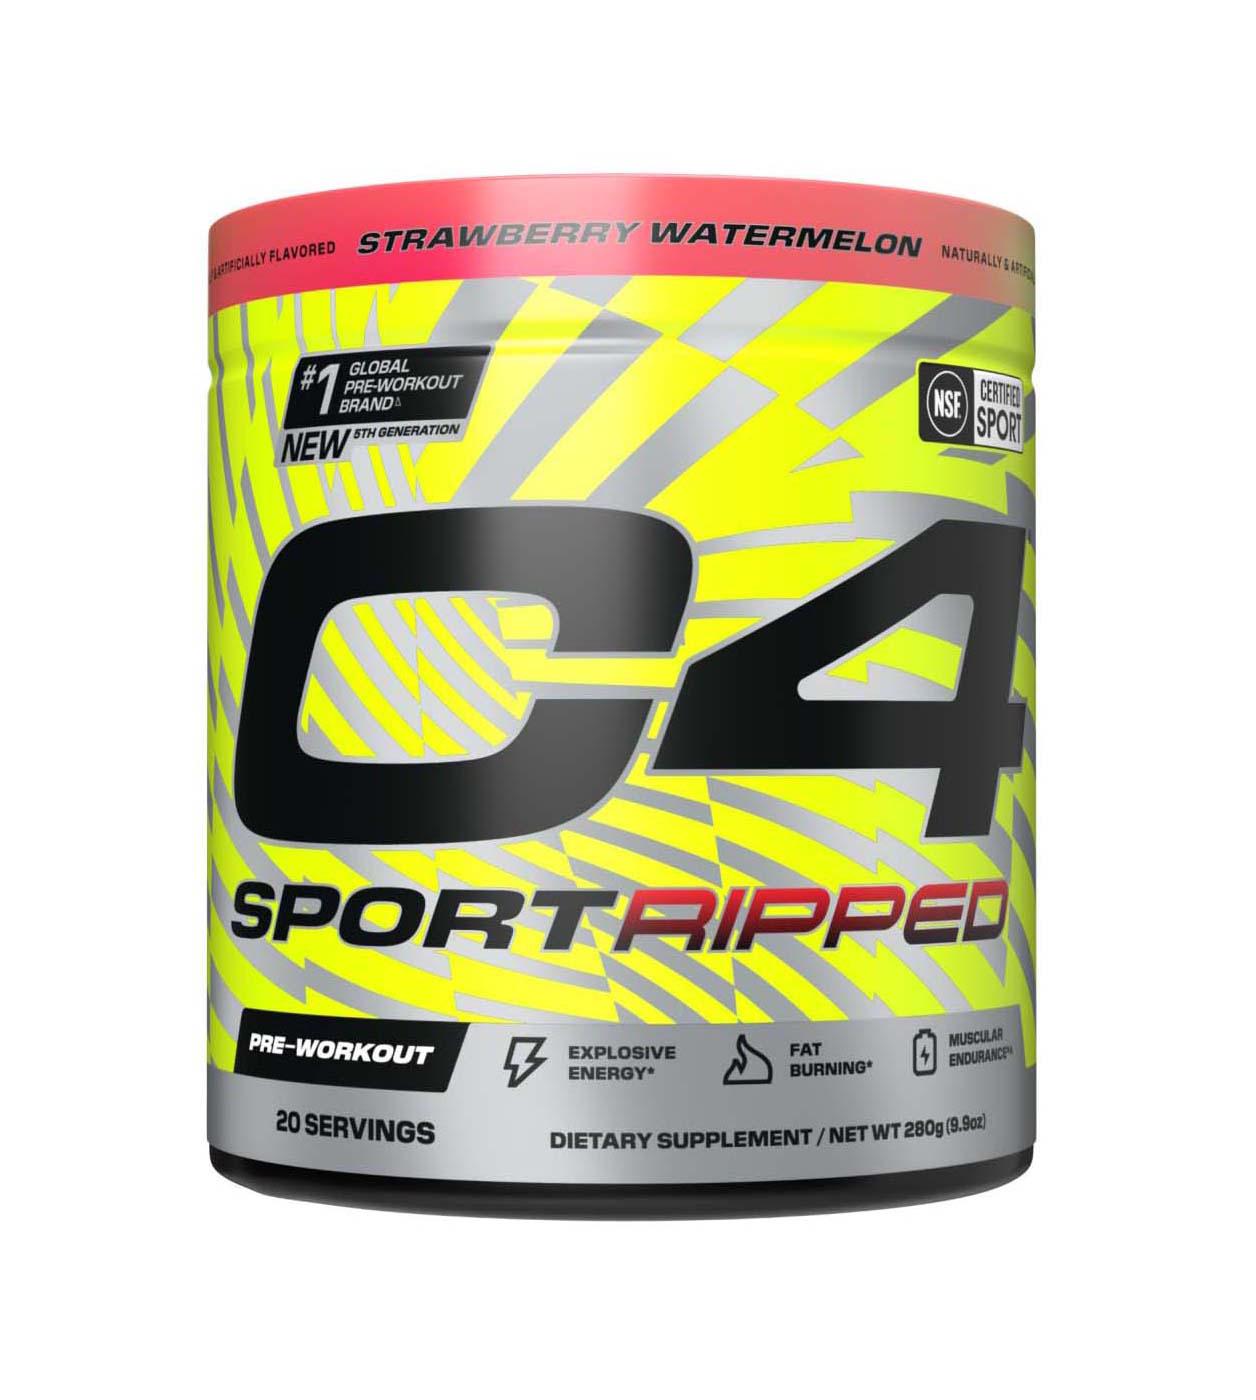 Cellucor C4 Sport Pre-Workout - Ripped Strawberry Watermelon; image 1 of 8